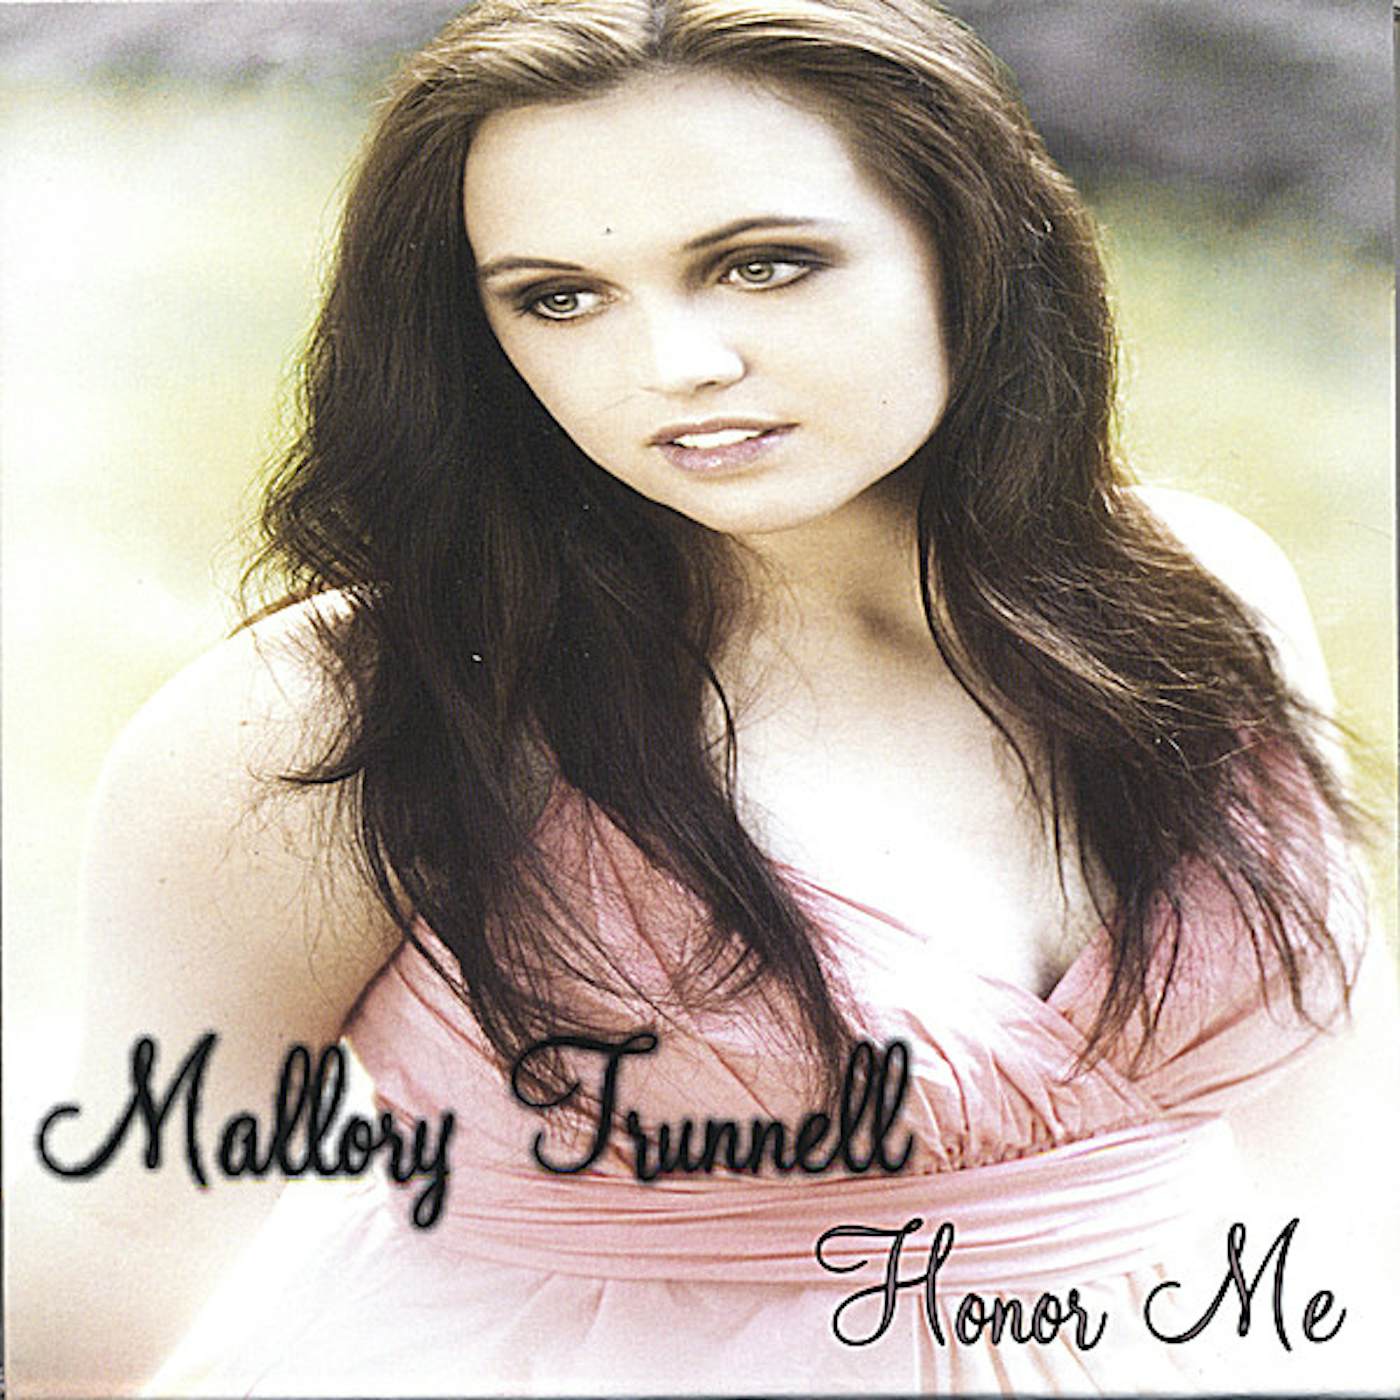 Mallory Trunnell HONOR ME CD